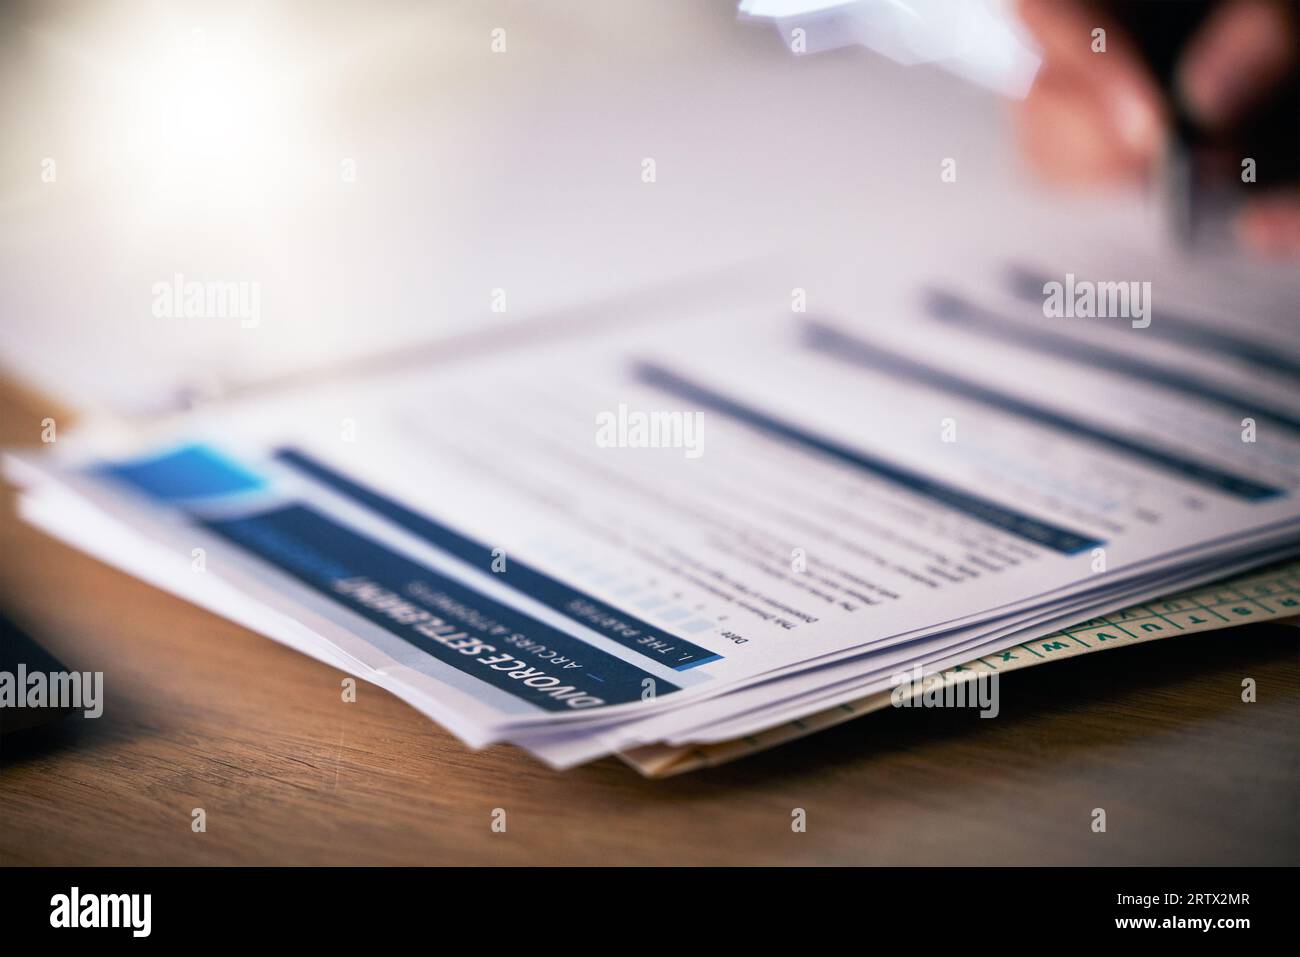 Person, hands and writing on divorce documents, application or information on table or office desk. Closeup of partner signing legal paperwork Stock Photo